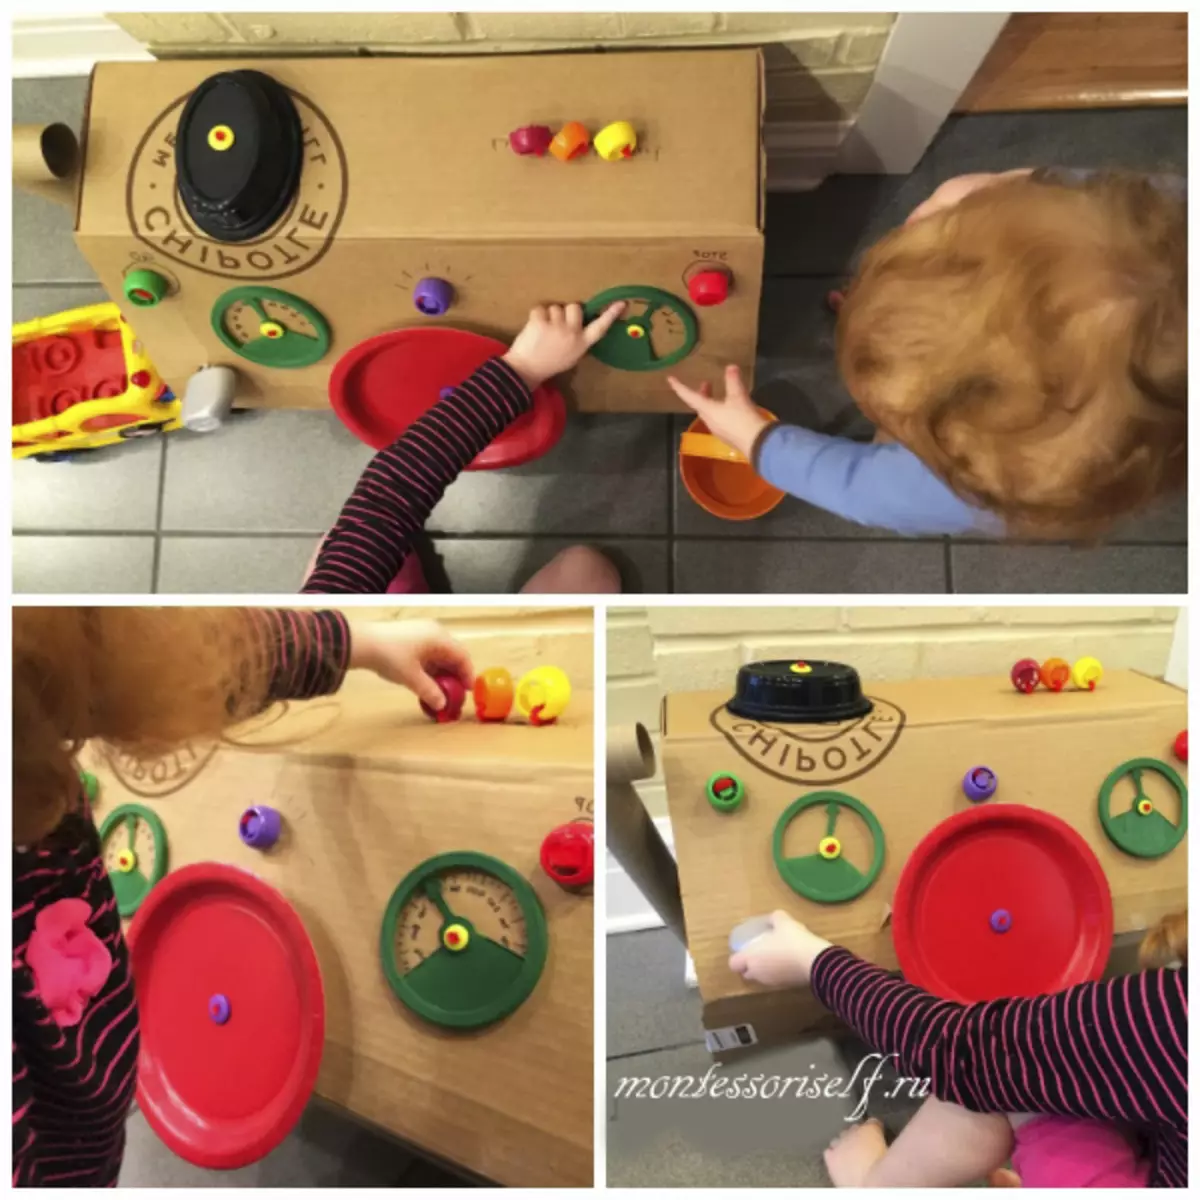 Toys from healthy materials do it yourself: Children's crafts with video